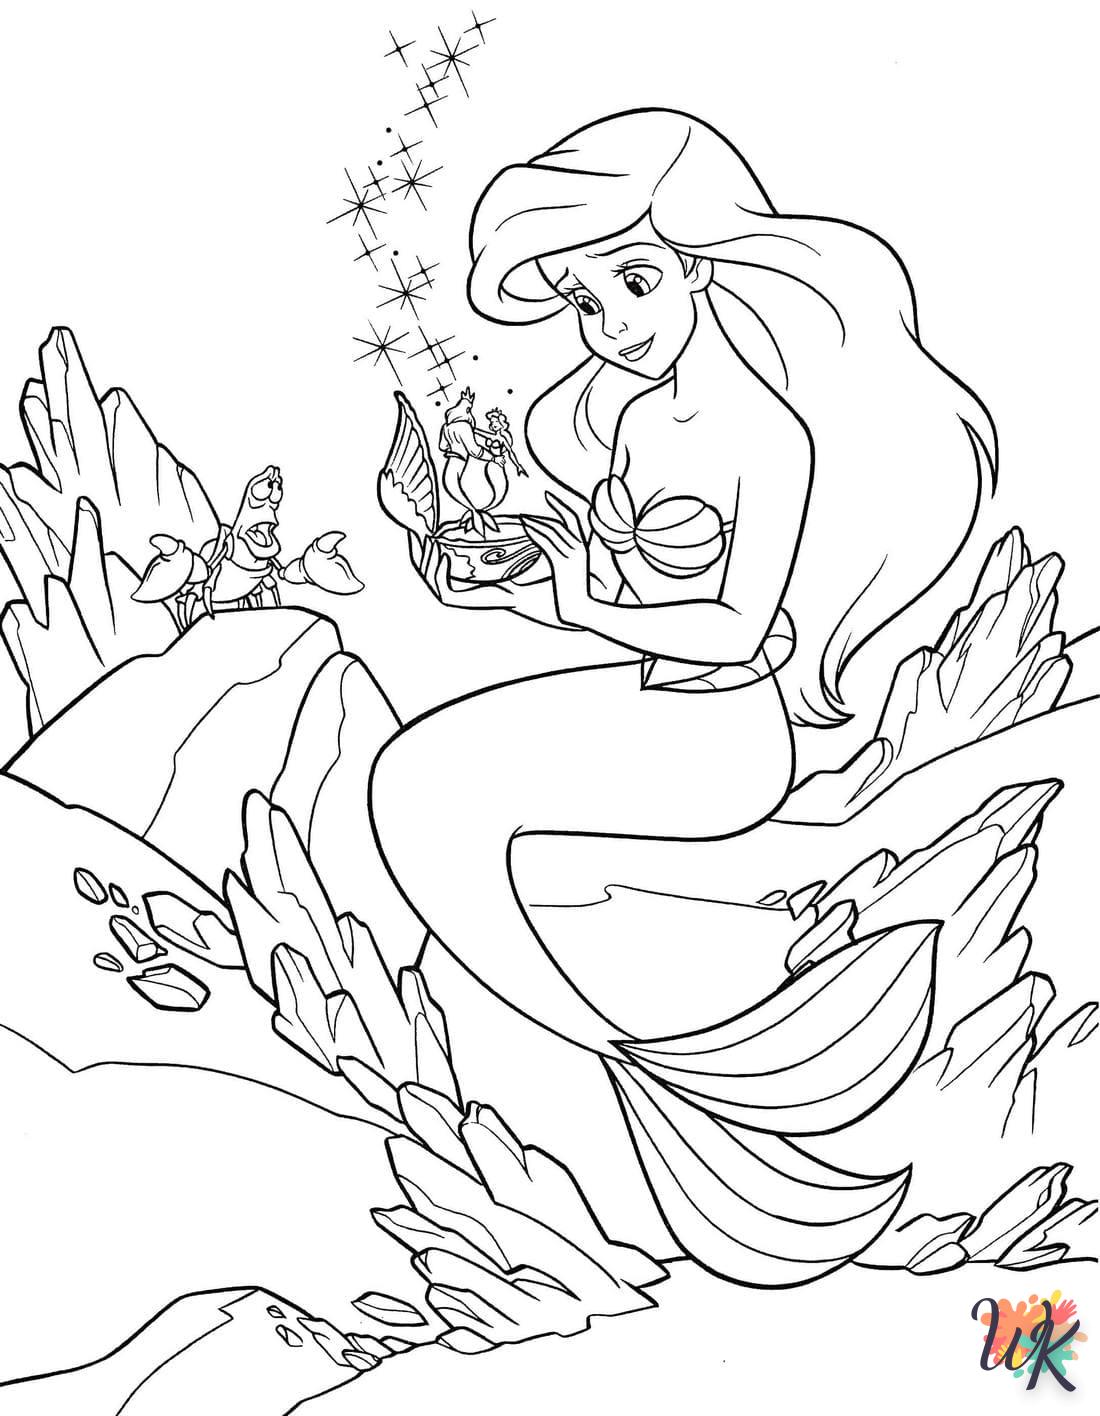 Disney coloring page to print a4 1